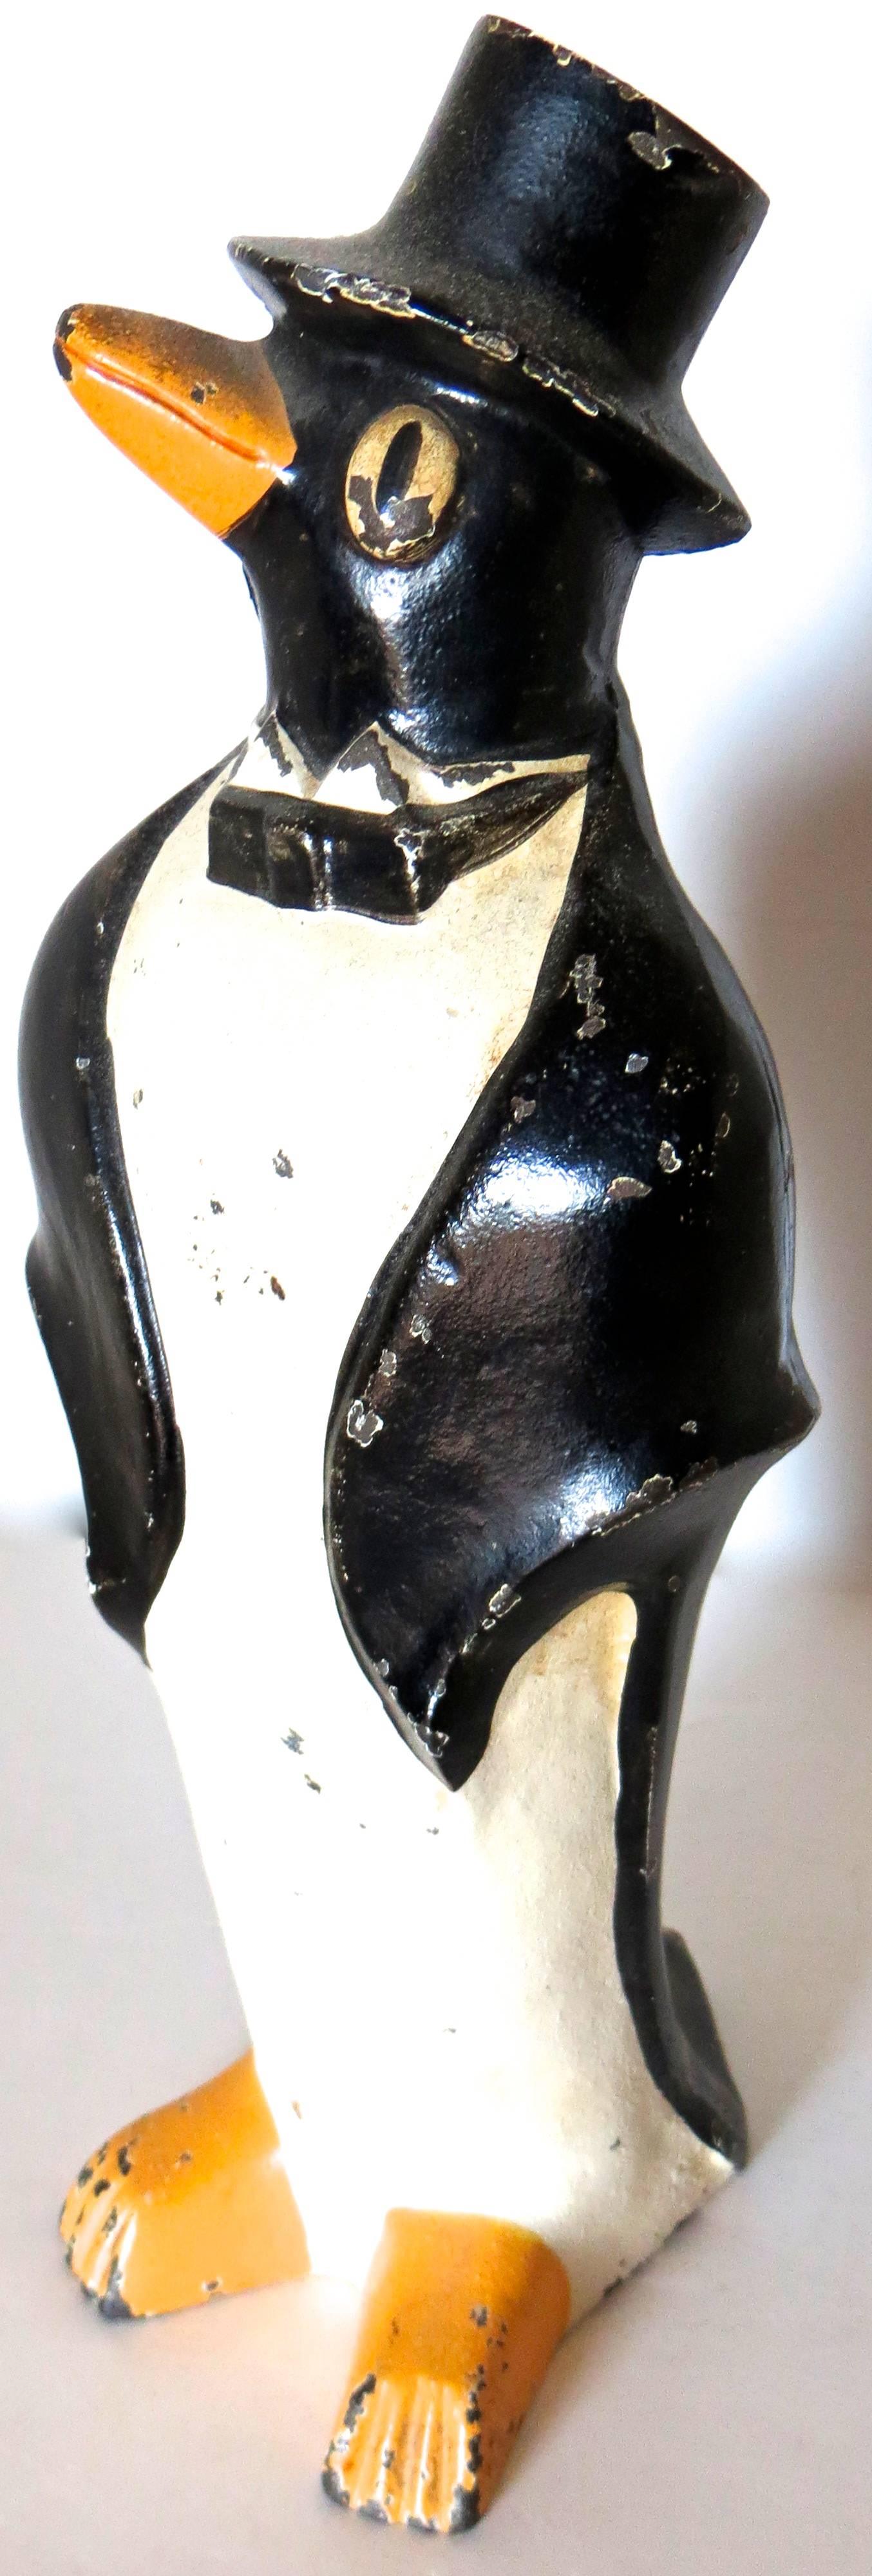 From my personal collection I am offering this whimsical caricature of a penguin dressed in a tuxedo referred to as "Penguin with Bow Tie and Top Hat". This cast iron two piece full figured doorstop was manufactured by the Hubley